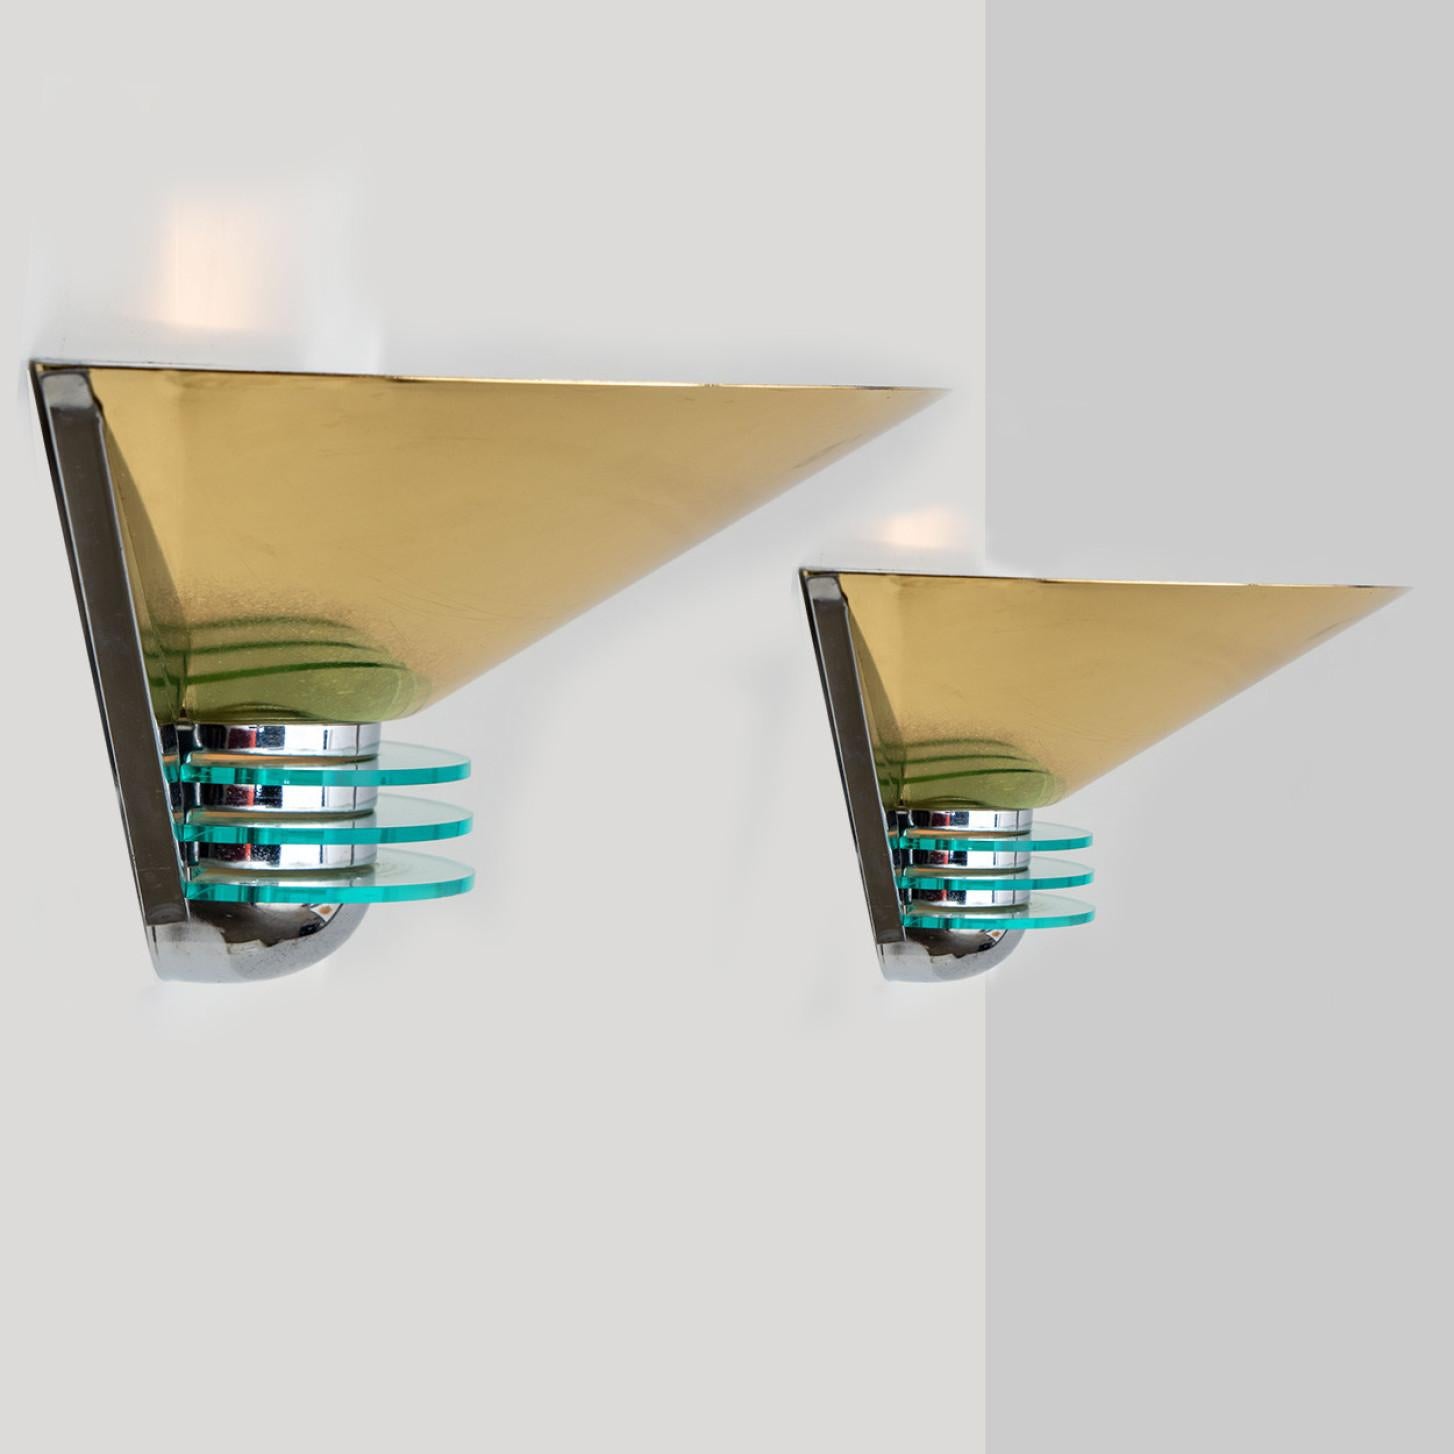 Triangle shaped wall lights in brass and chrome with glass details. Manufactured in Germany during the 1980s.
Nice craftsmanship. Minimal, geometric and simply shaped design.

Please note the price is for a pair. We have one set